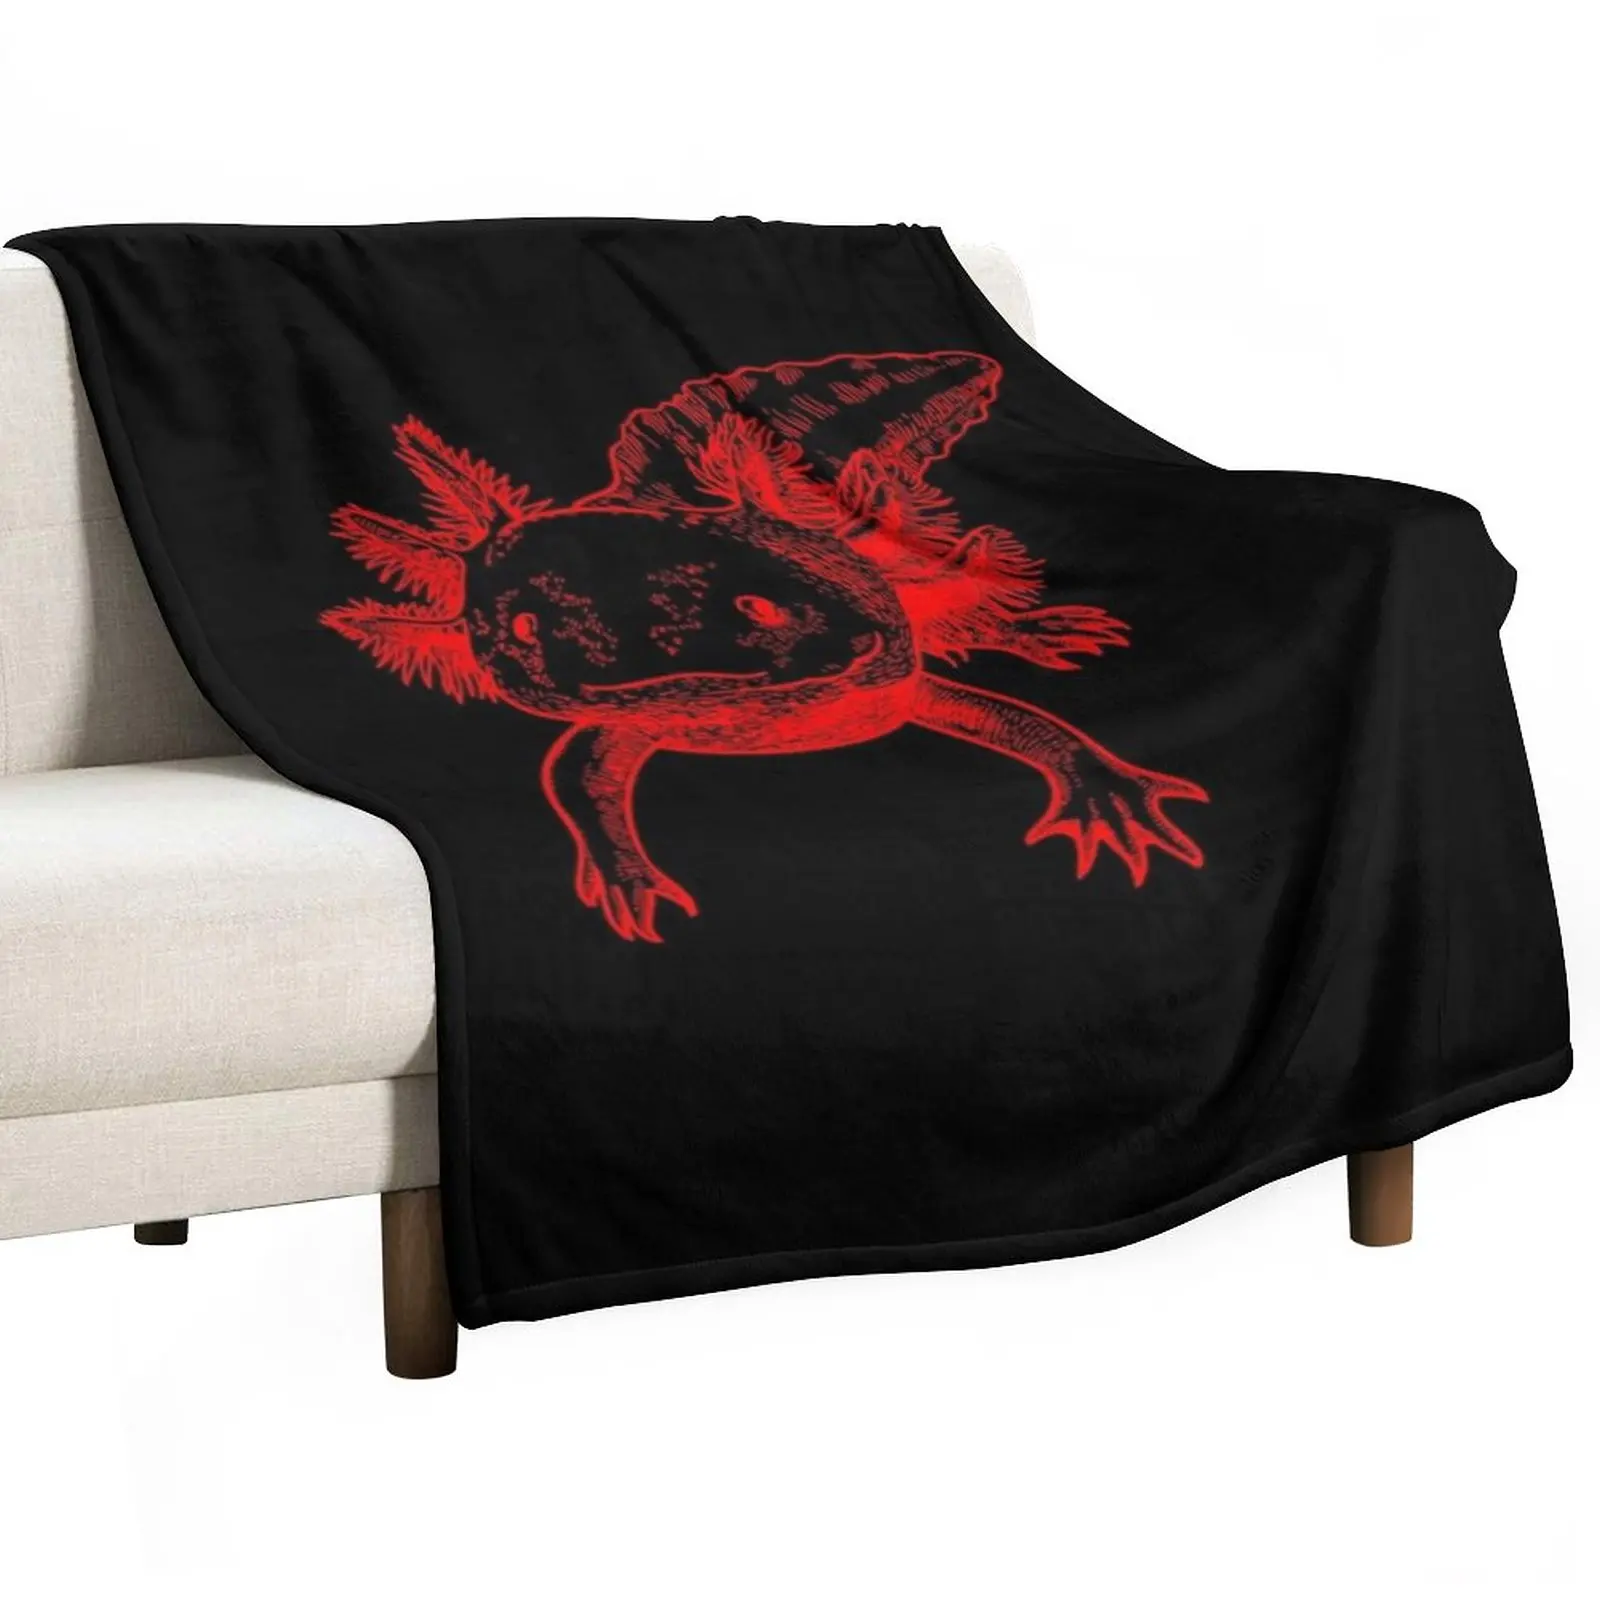 

Axolotl Throw Blanket Blanket For Decorative Sofa Blankets For Baby Personalized Gift